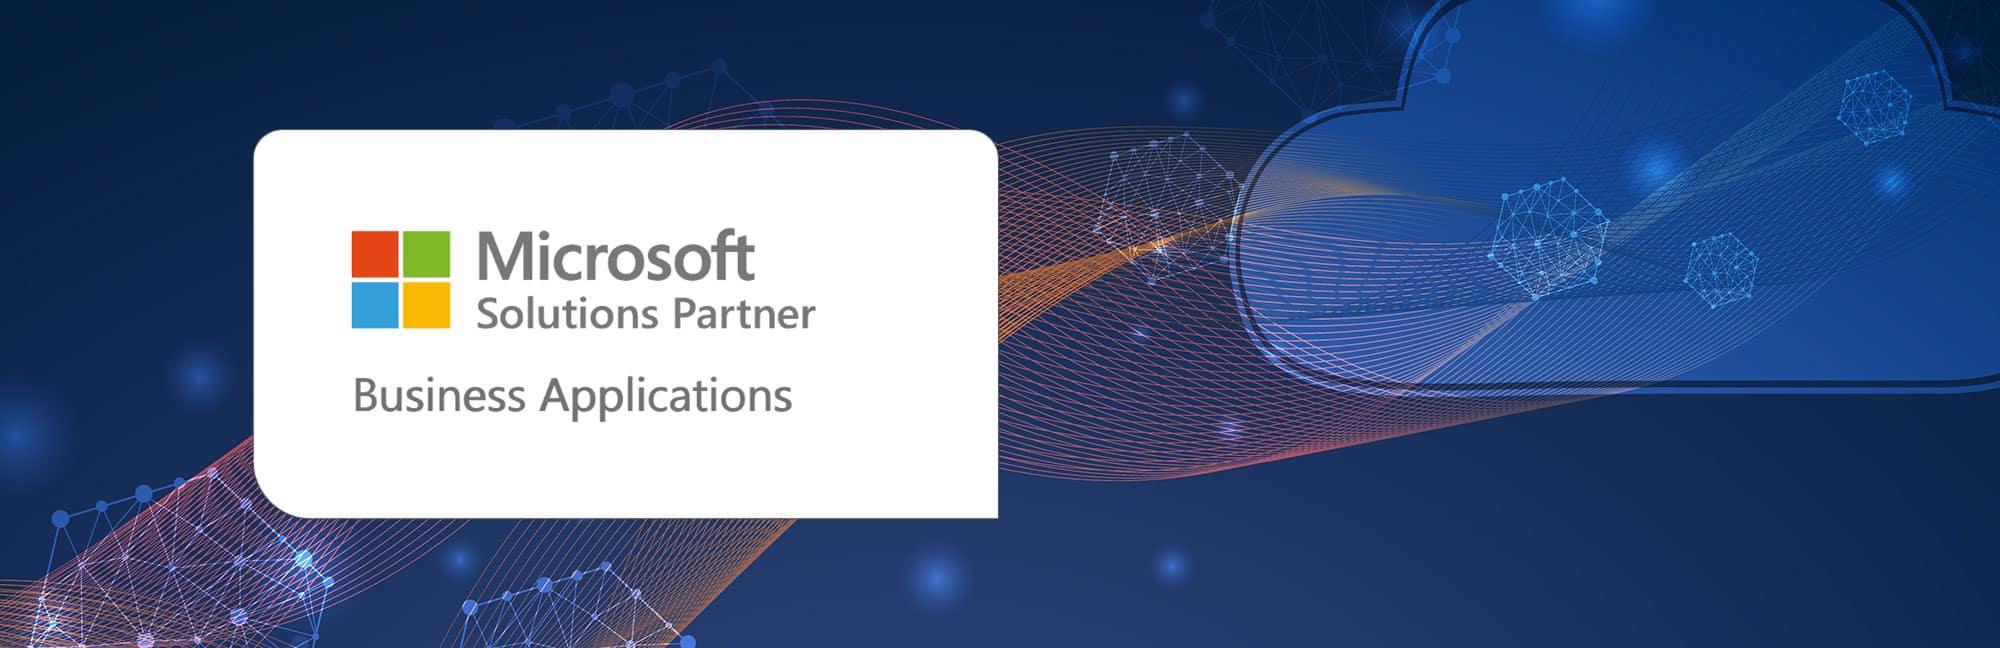 GMI group | Microsoft Solutions Partner for Business Applications